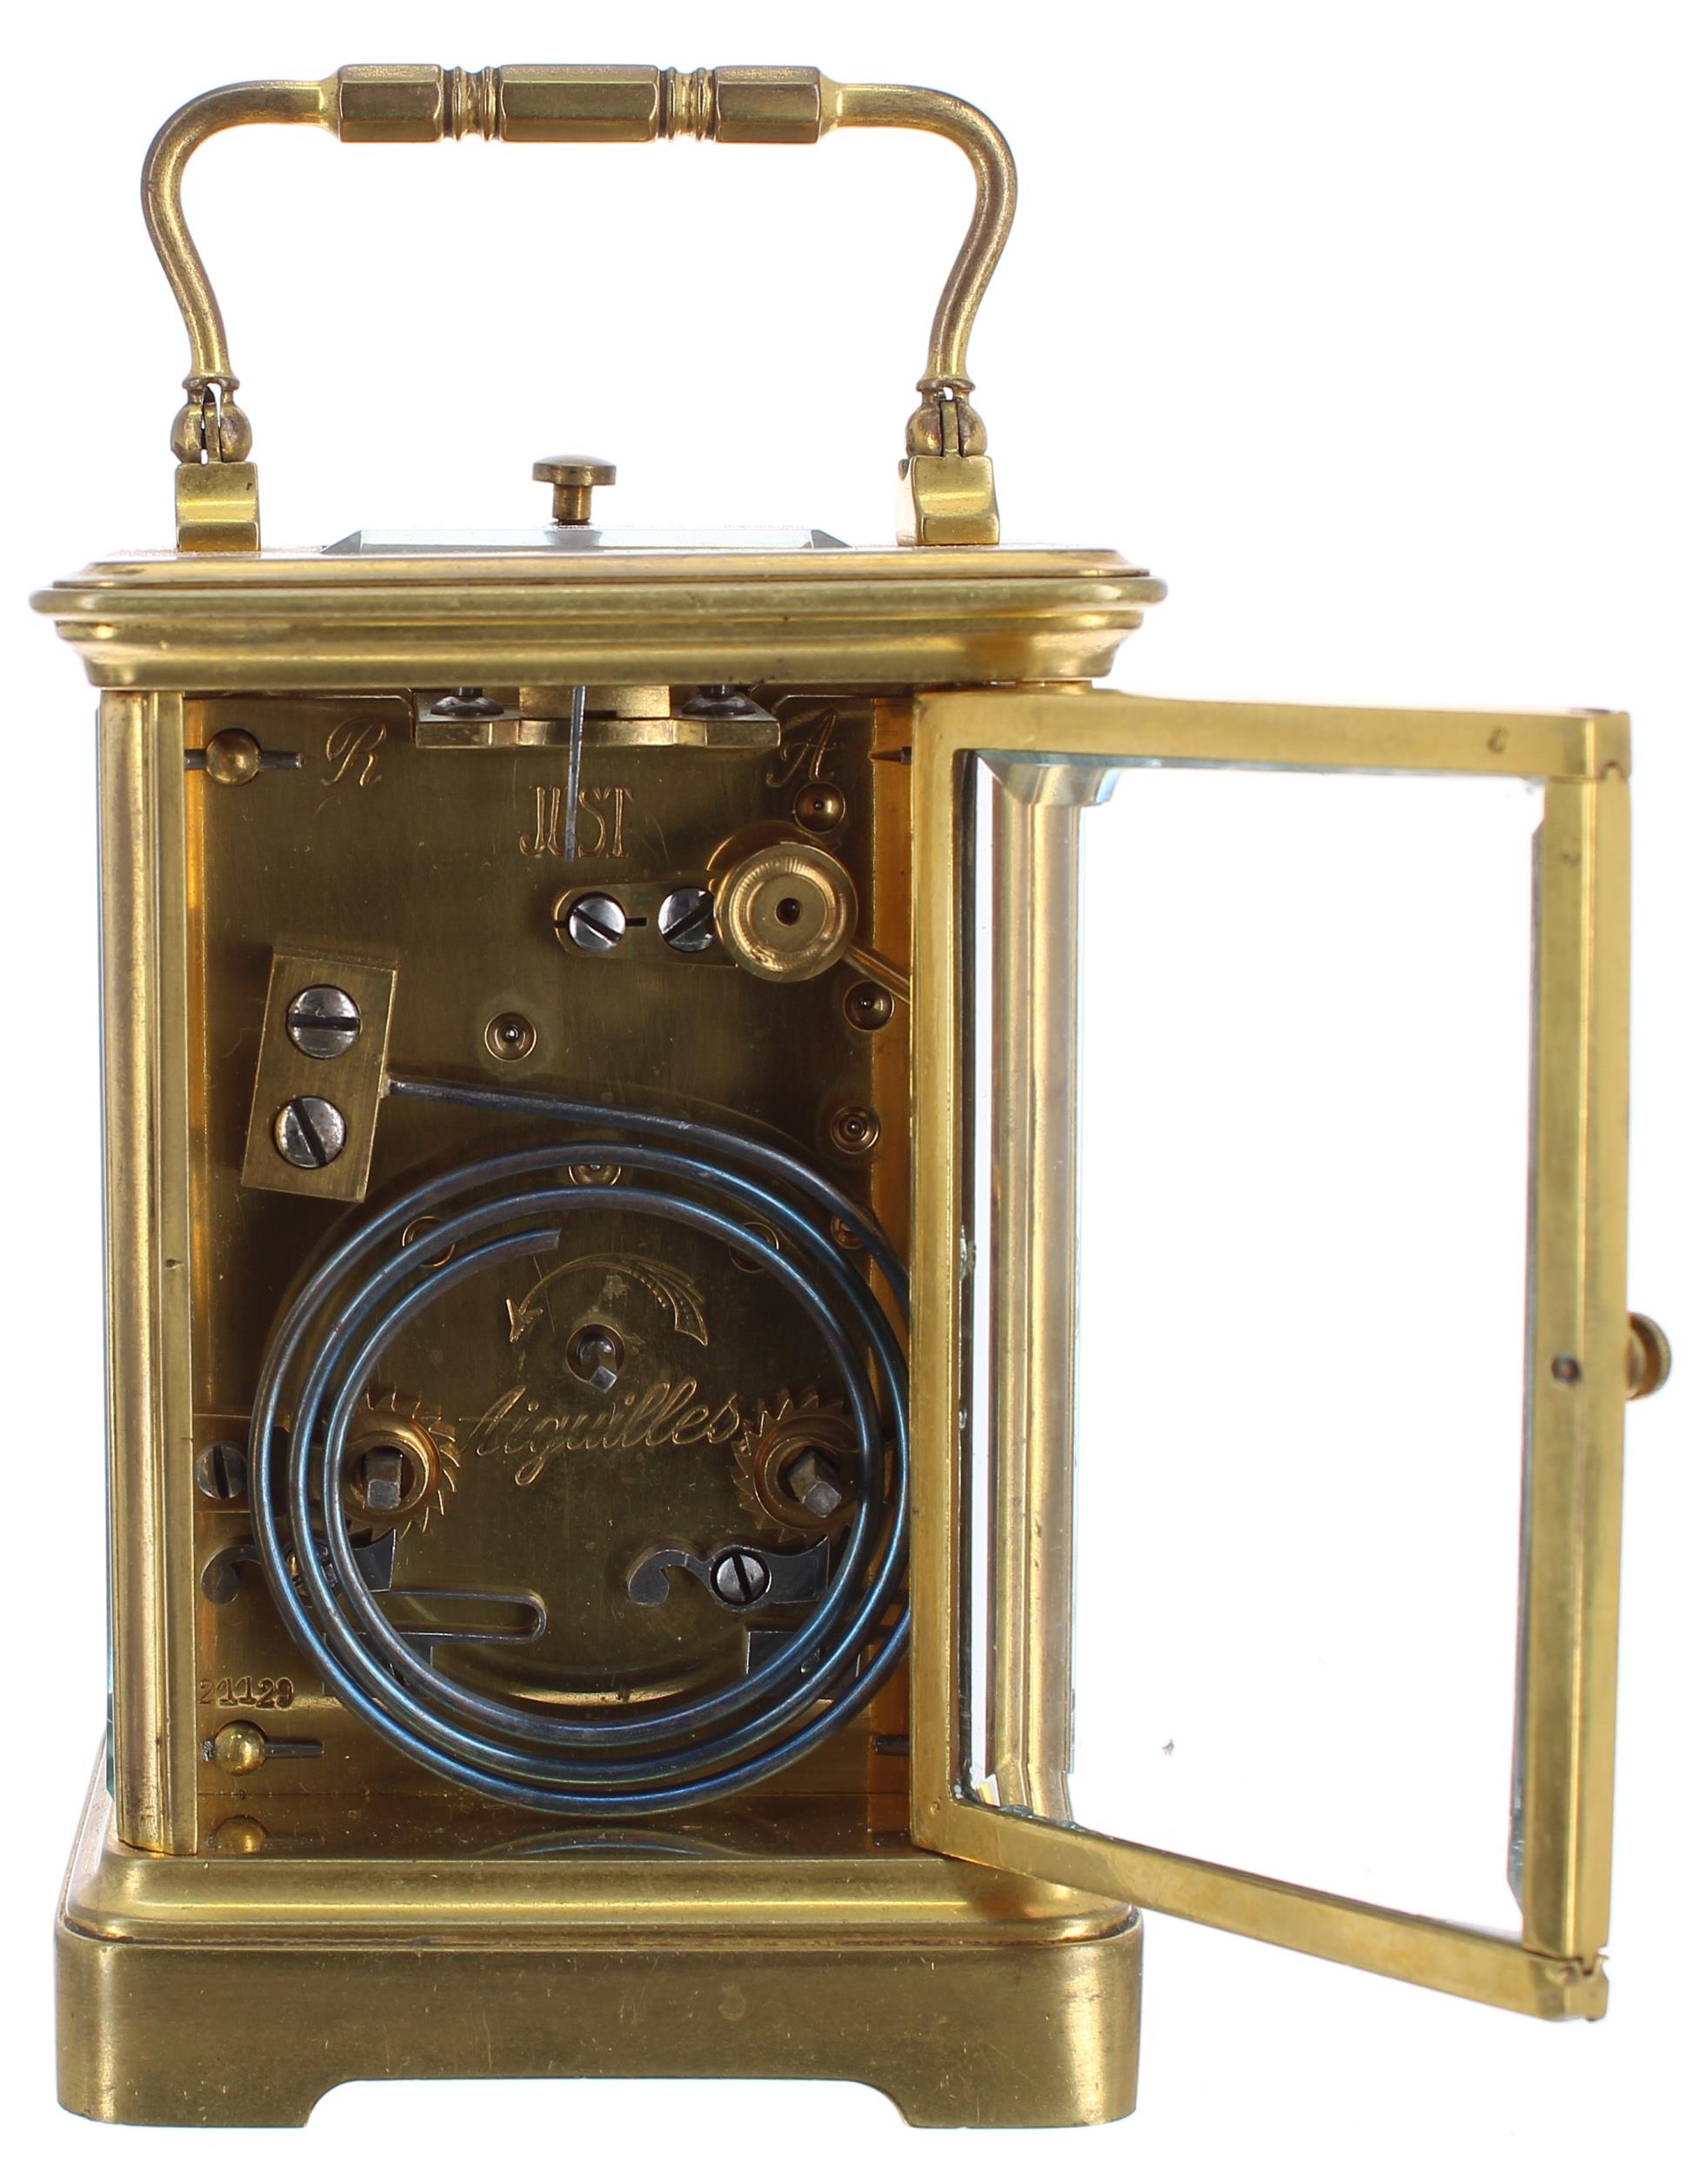 Small French repeater carriage clock striking on a gong, the back plate inscribed Just, no. 21129, - Image 5 of 5